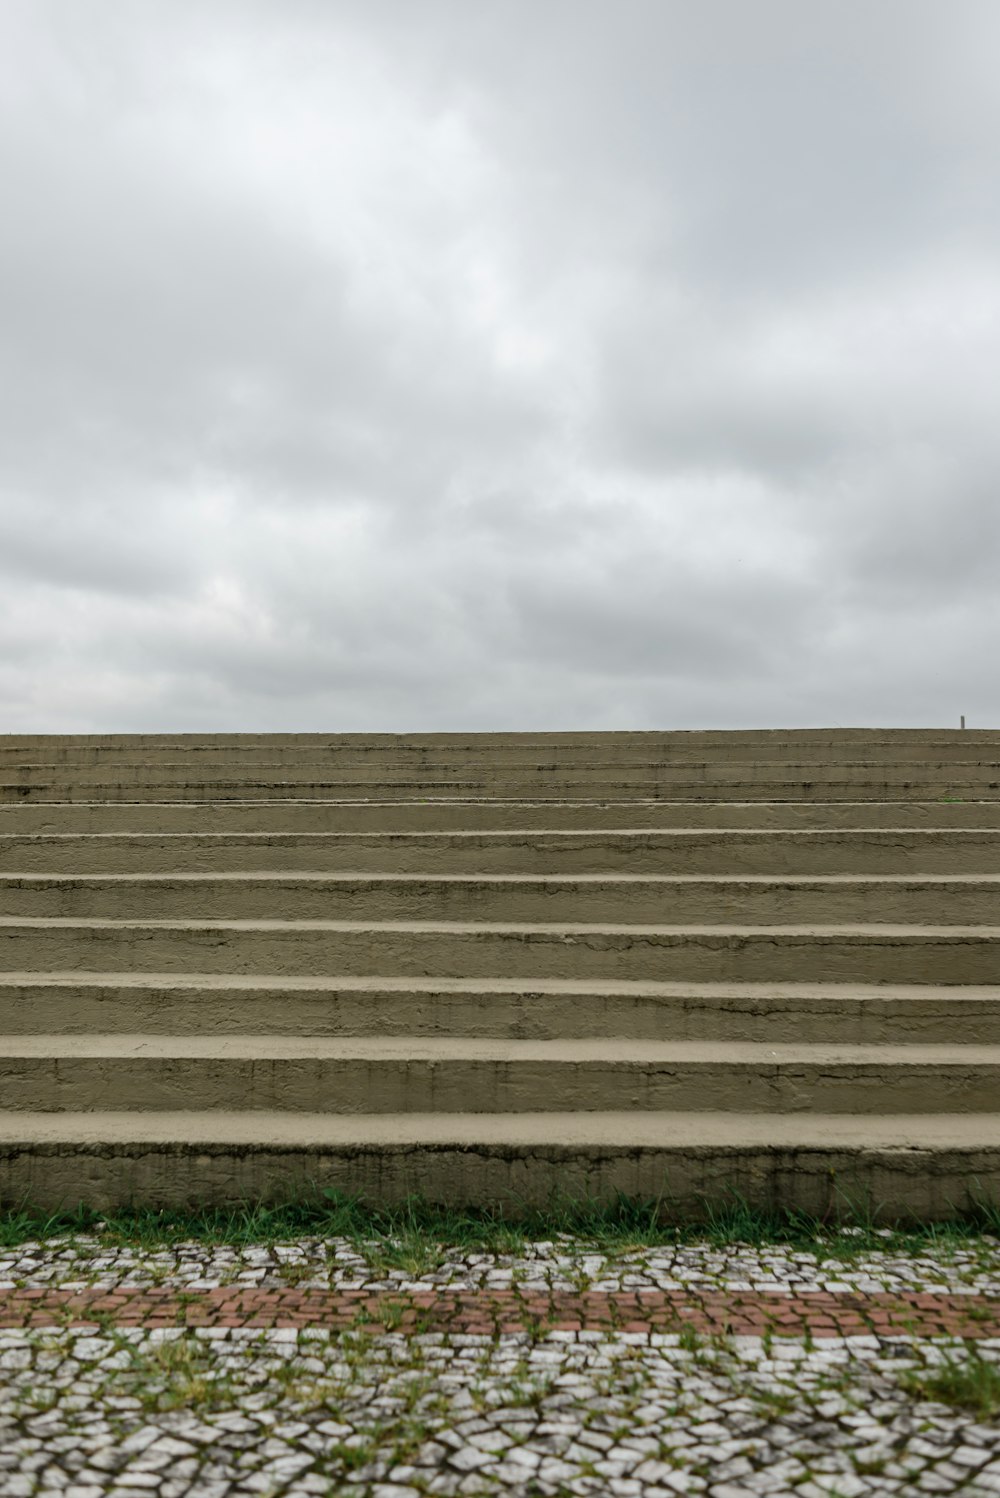 a person walking up a set of stairs